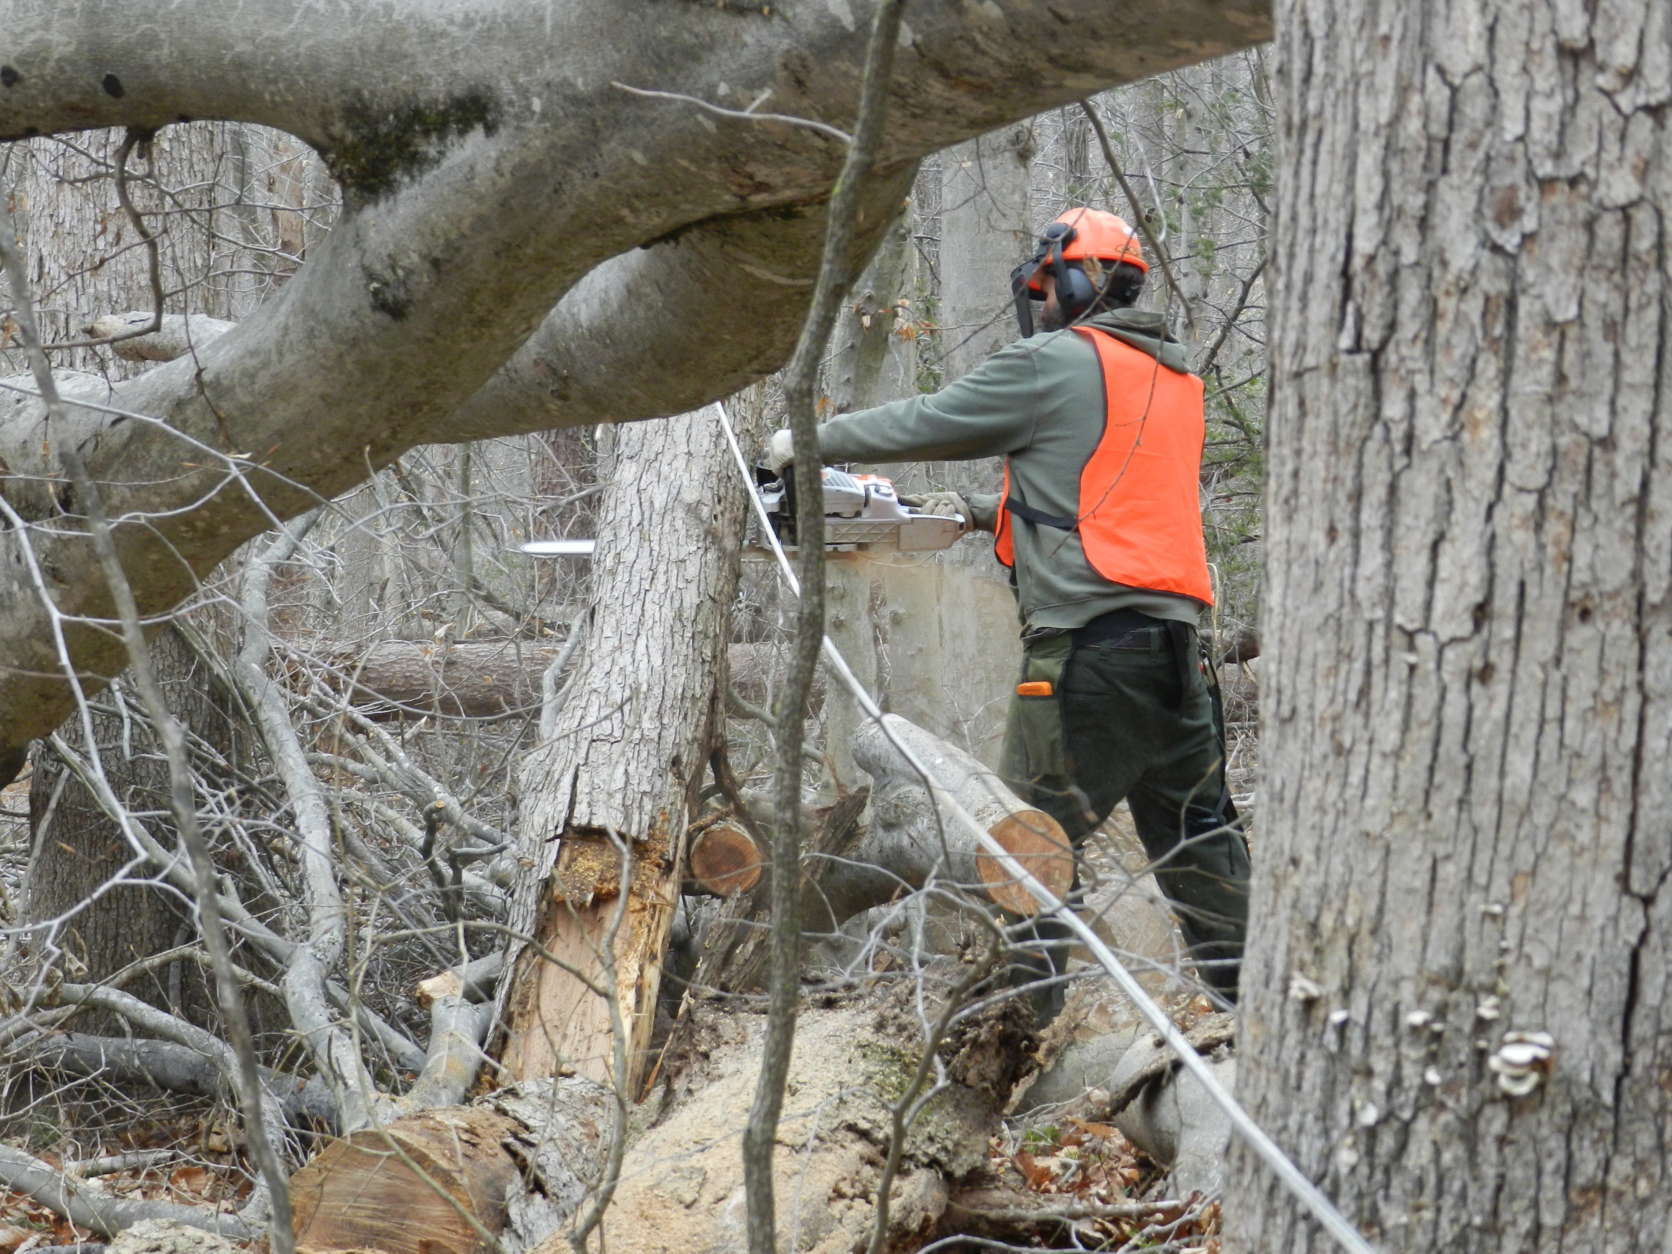 A National Park Service worker cuts a fallen tree at Prince William Forest Park. Over 800 fallen and hazardous trees had been cleared as of Tuesday. (Courtesy National Park Service)